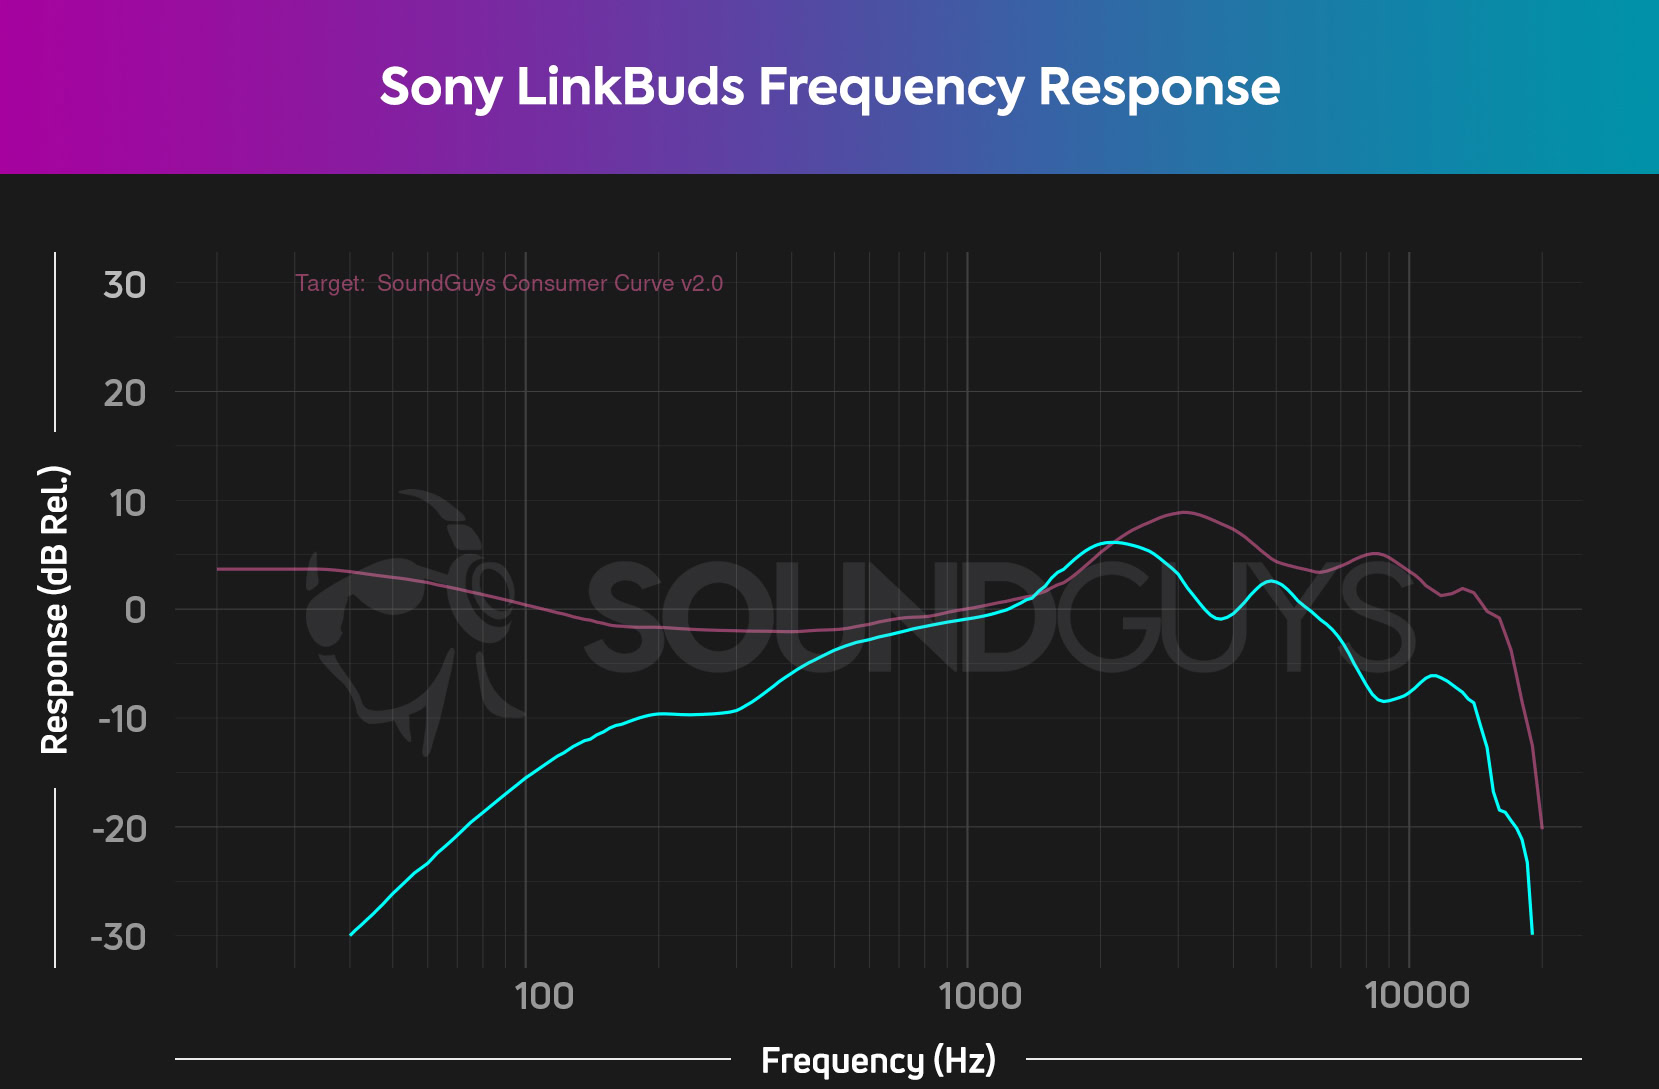 Sony LinkBuds frequency response chart.